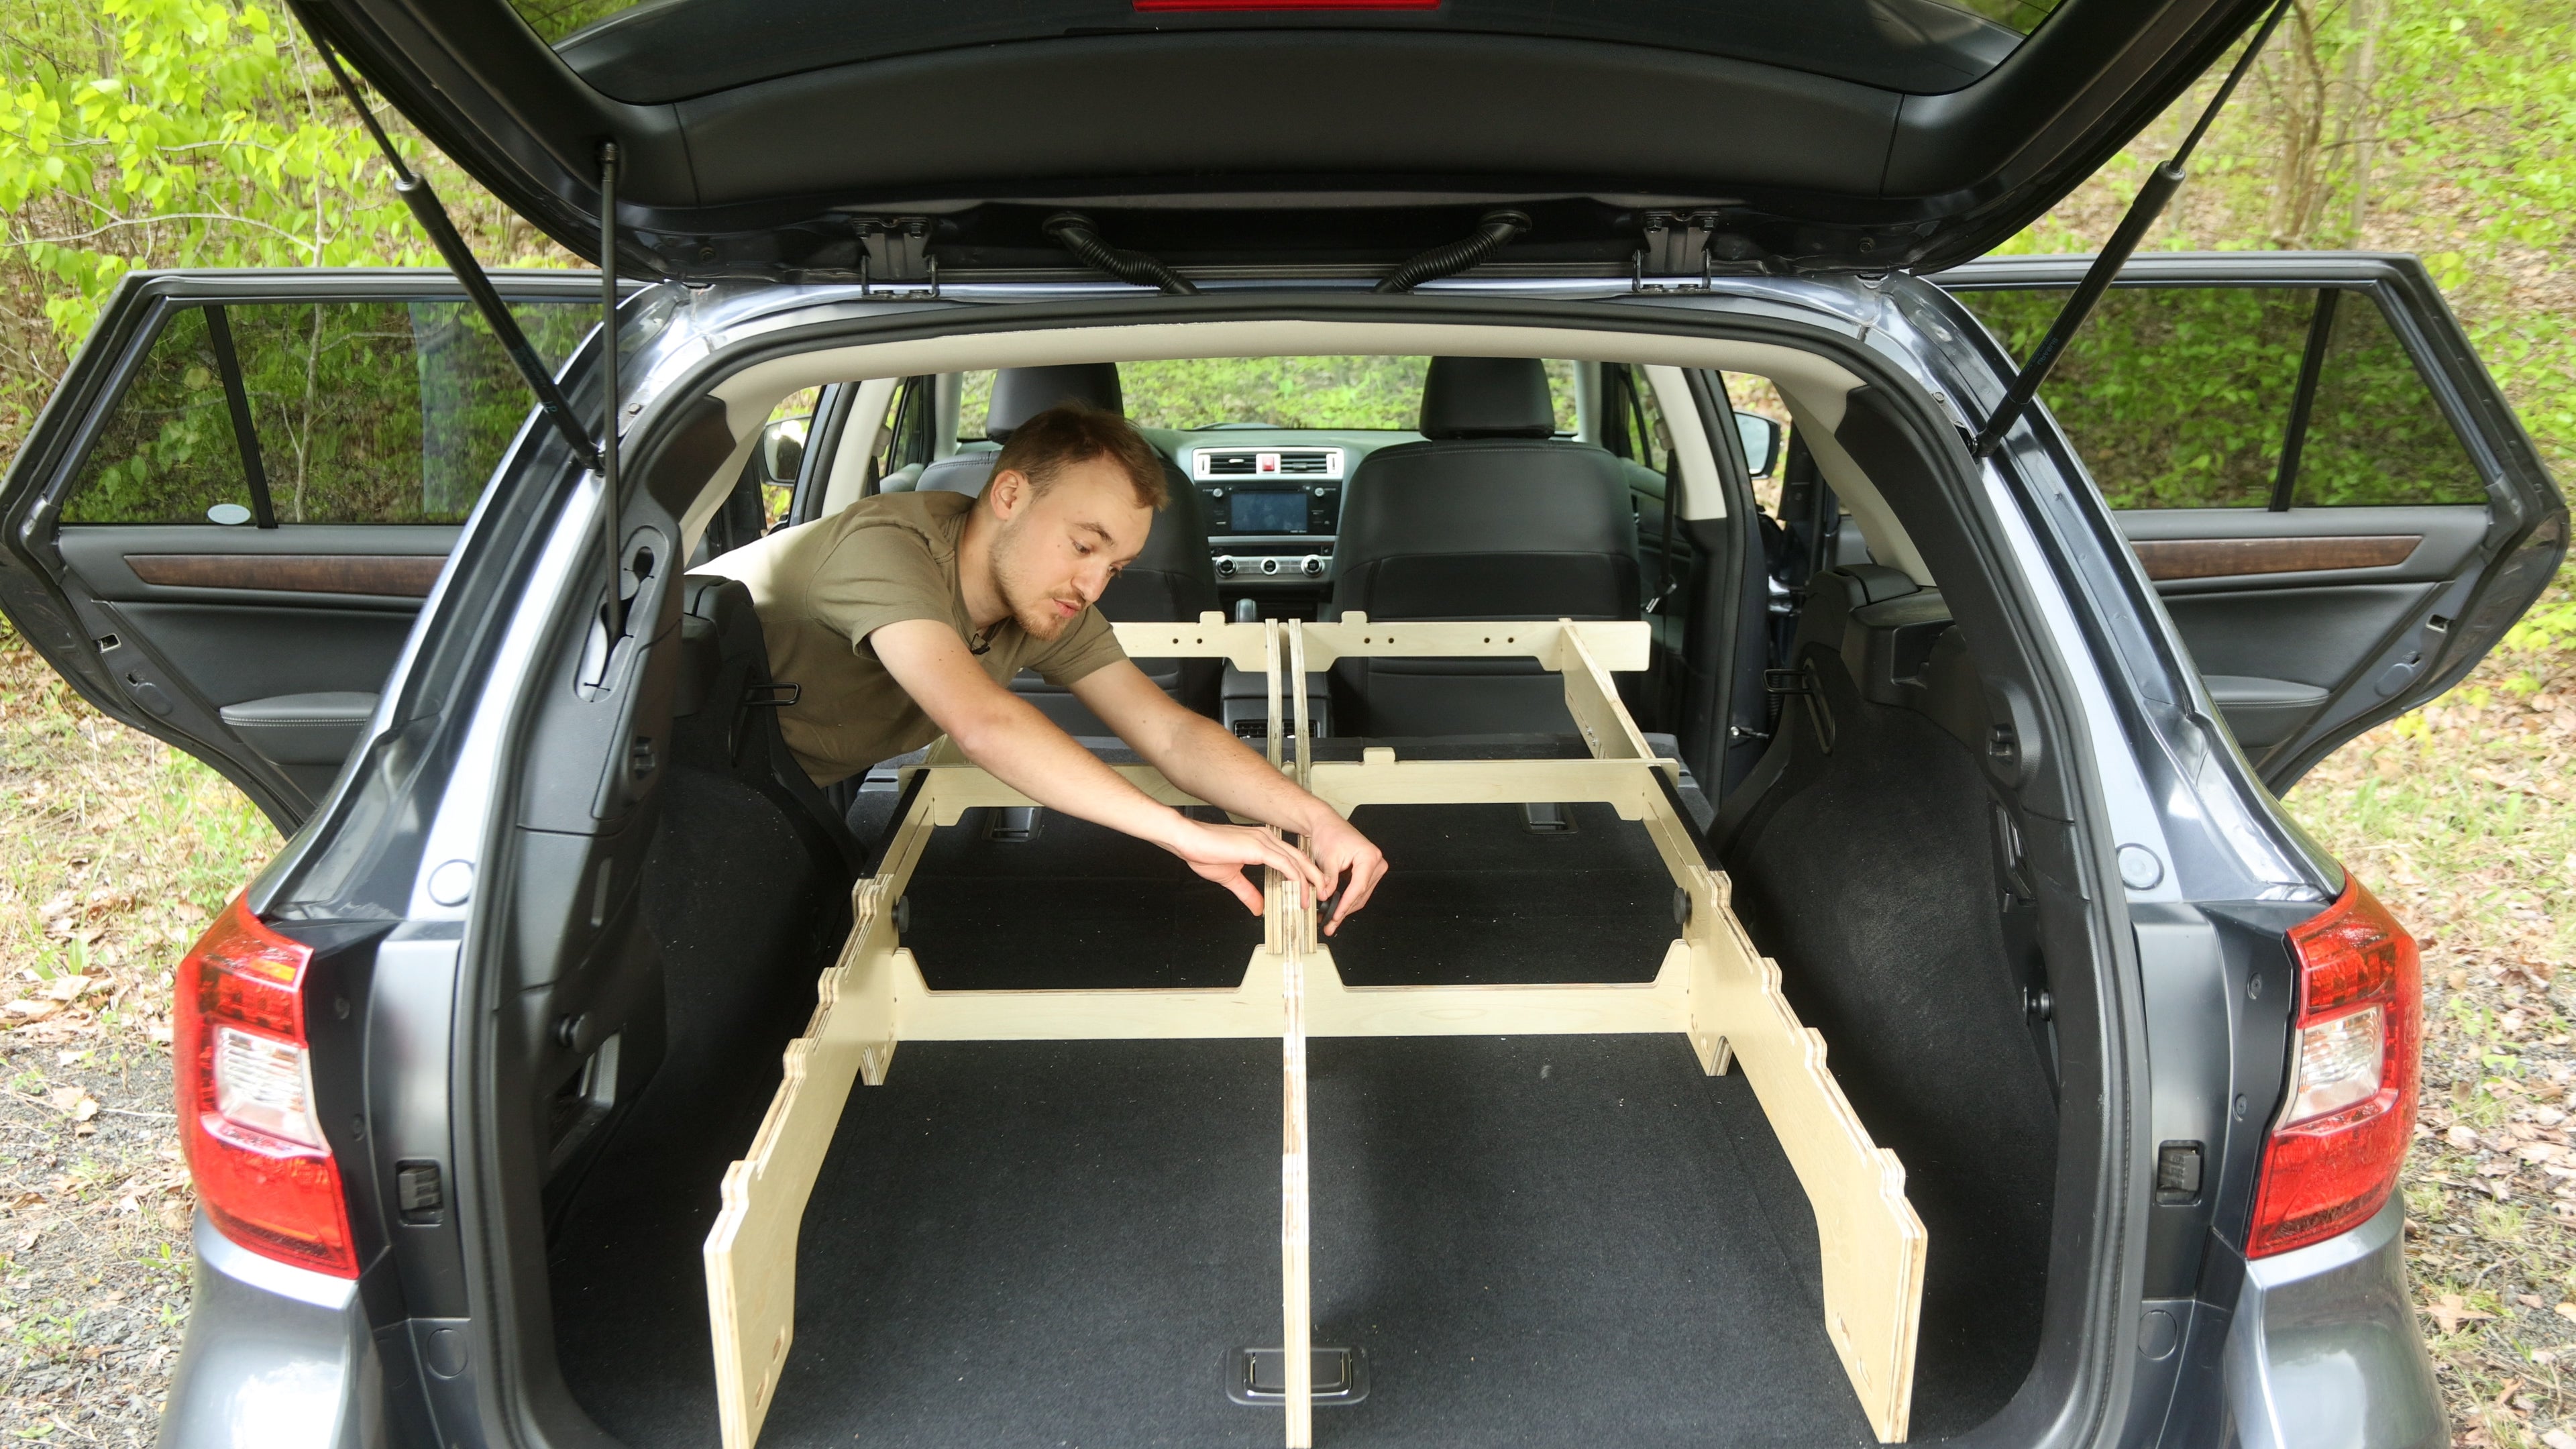 Load video: This install video will guide you step-by-step on how to install your new Sleeping Platform for car camping in your Toyota RAV4!